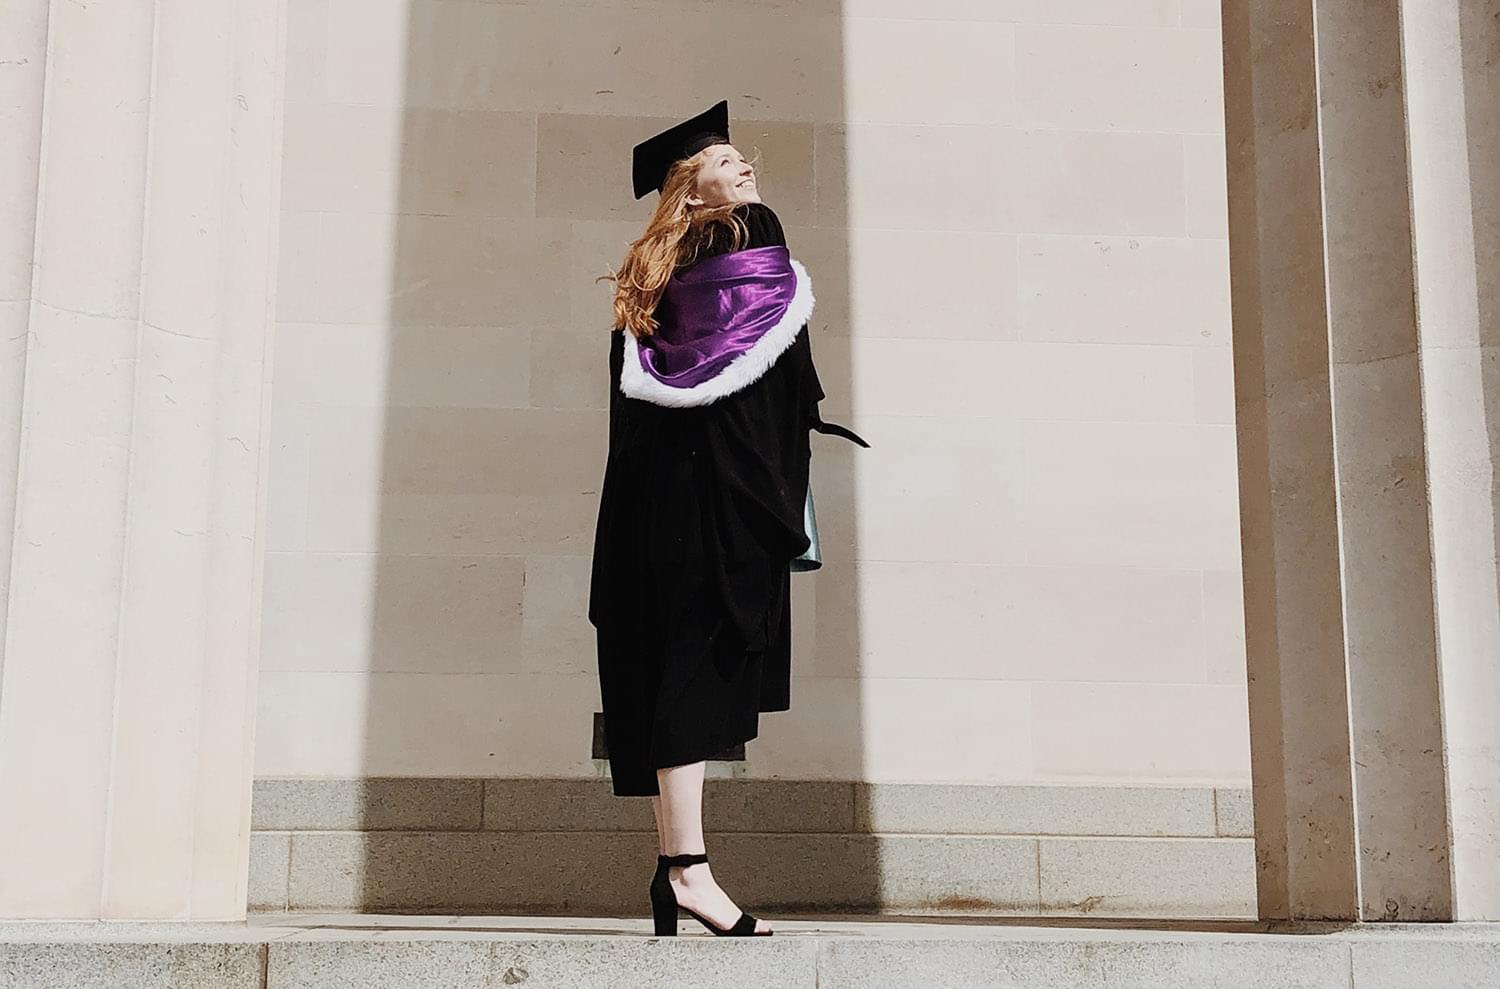 Woman wearing a mortar board hat and gown standing in front of a building